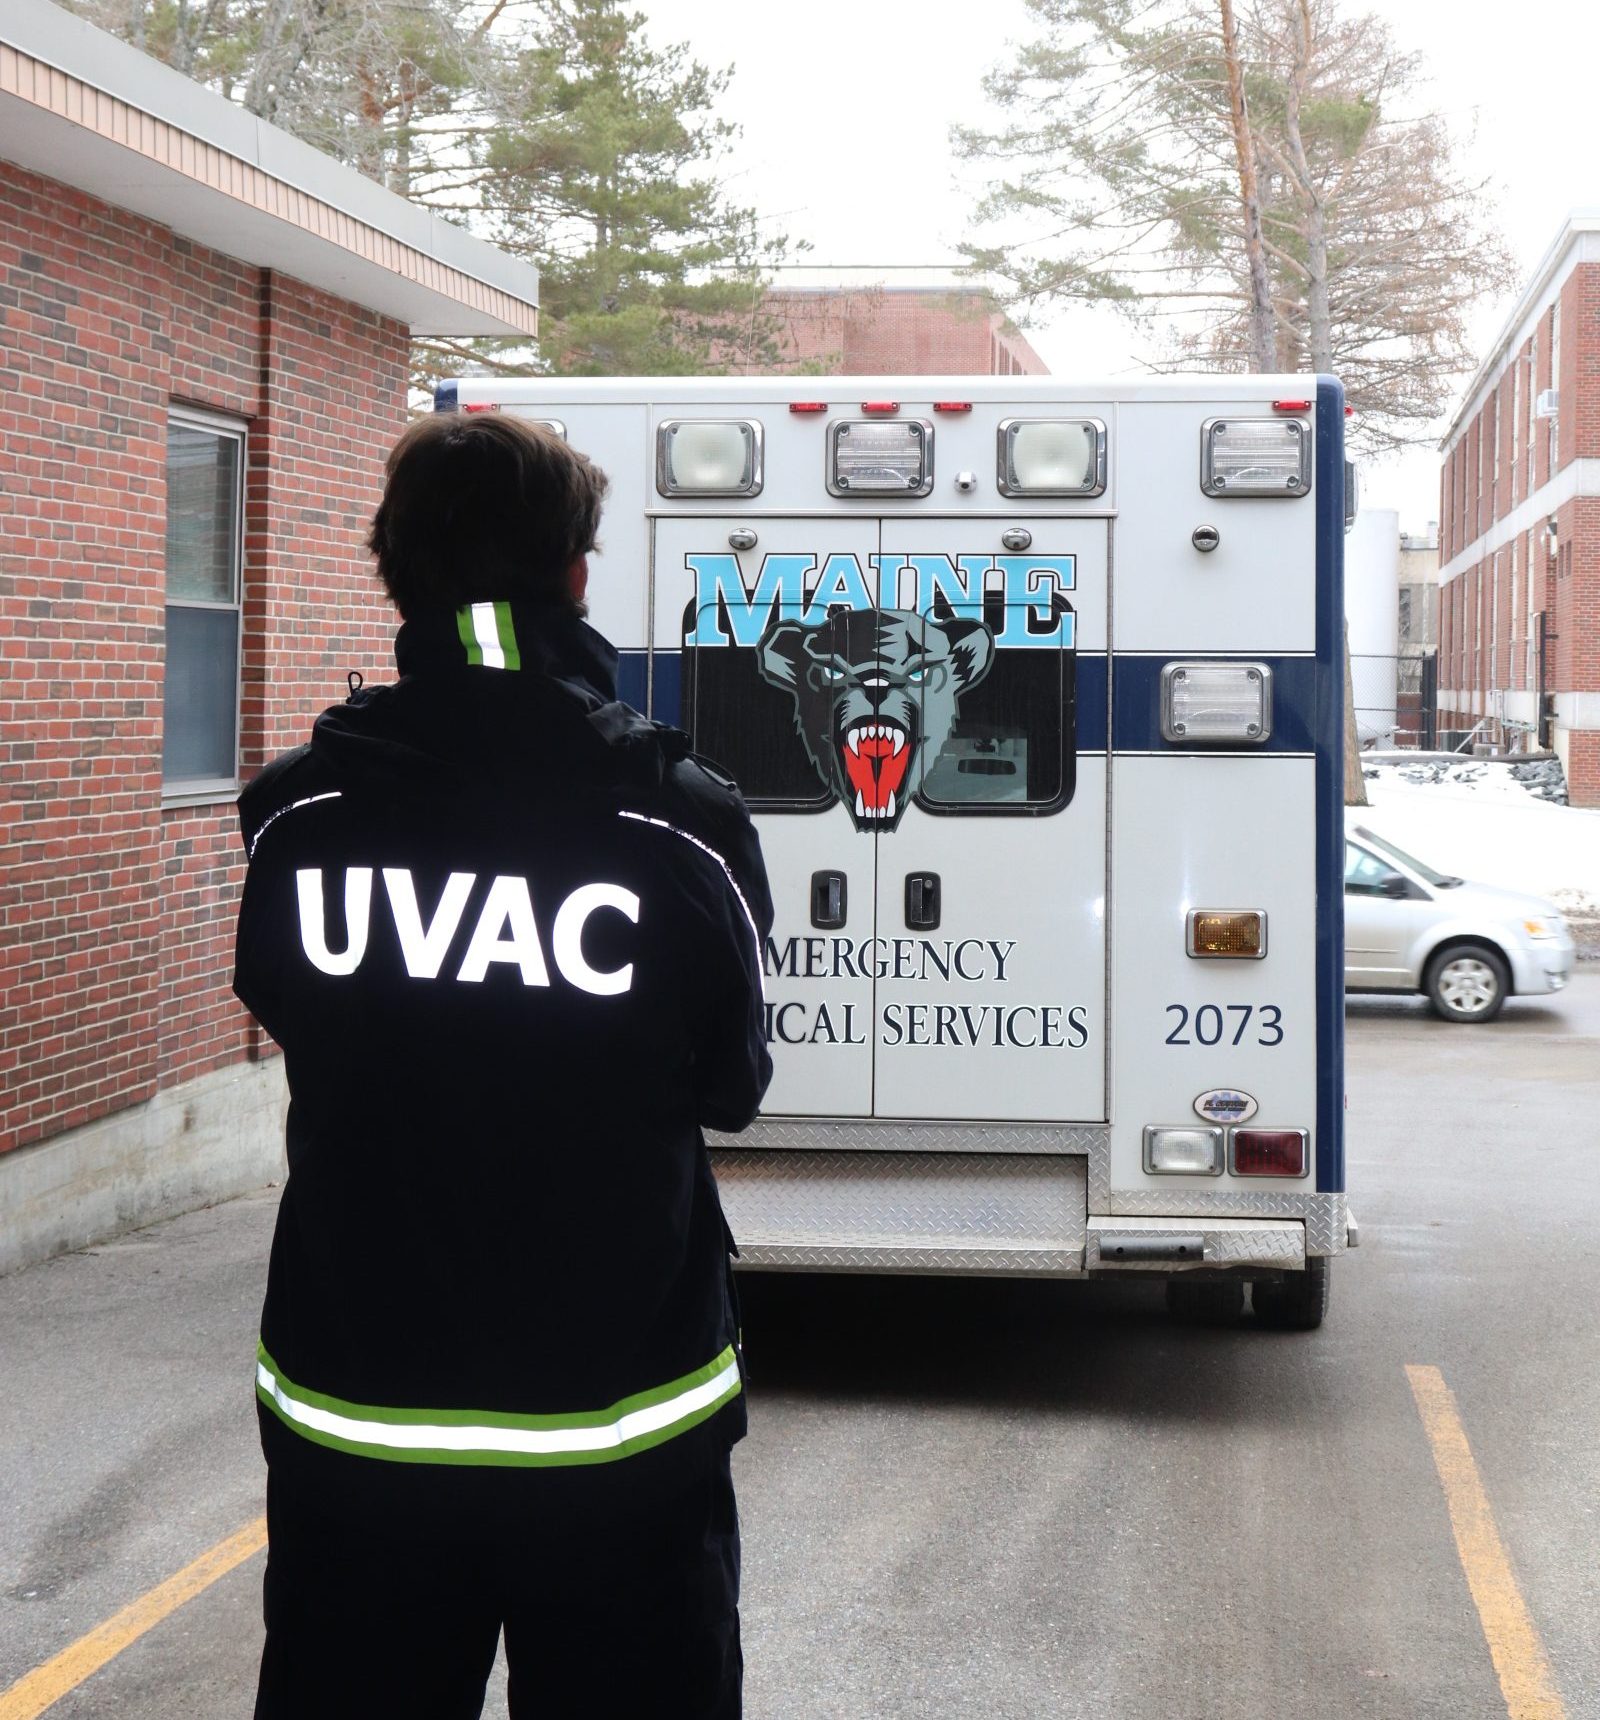 A UVAC member stands in the foreground facing away. He is wearing a jacket with "UVAC" on the back. In front of him our box-truck ambulance is parked on the ramp outside of the ambulance bay.